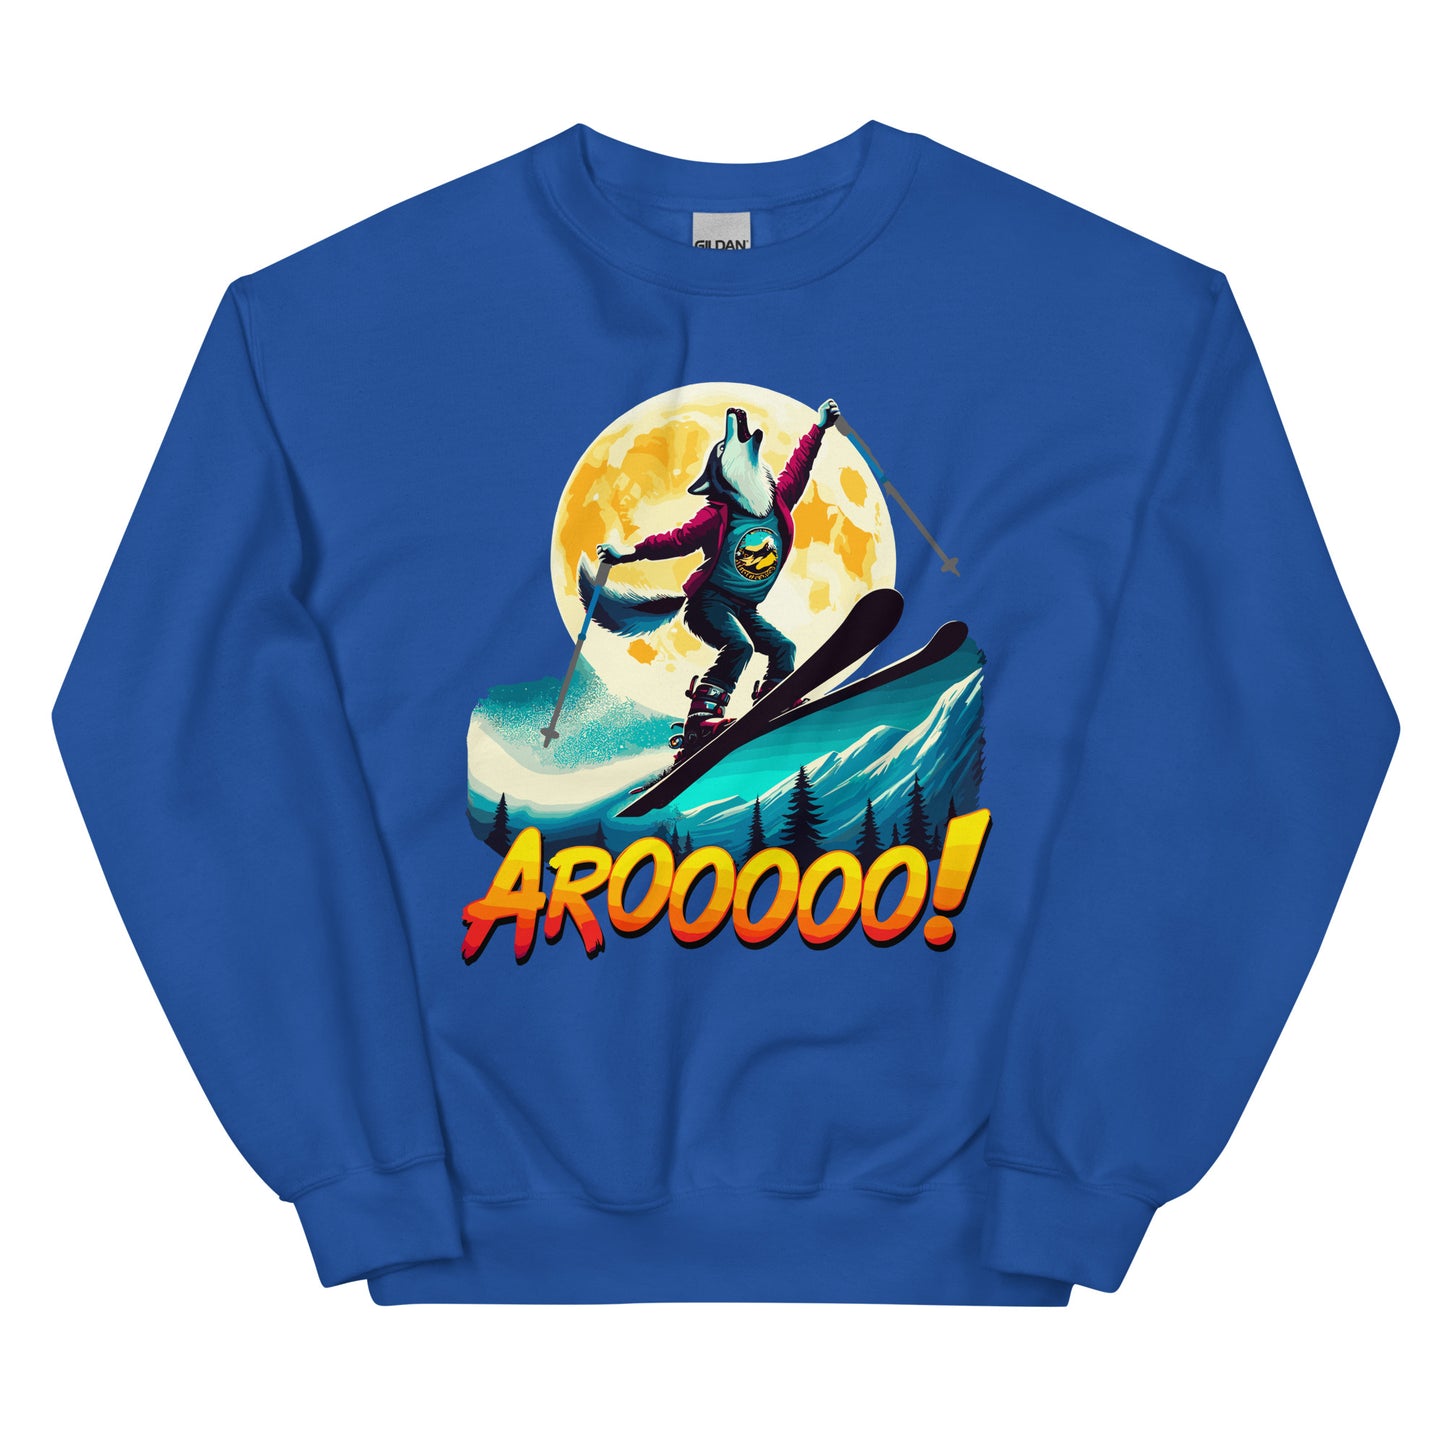 AROOO! Wolf doing a ski jump in front of a full moon printed on a crewneck sweatshirt by Whistler Shirts